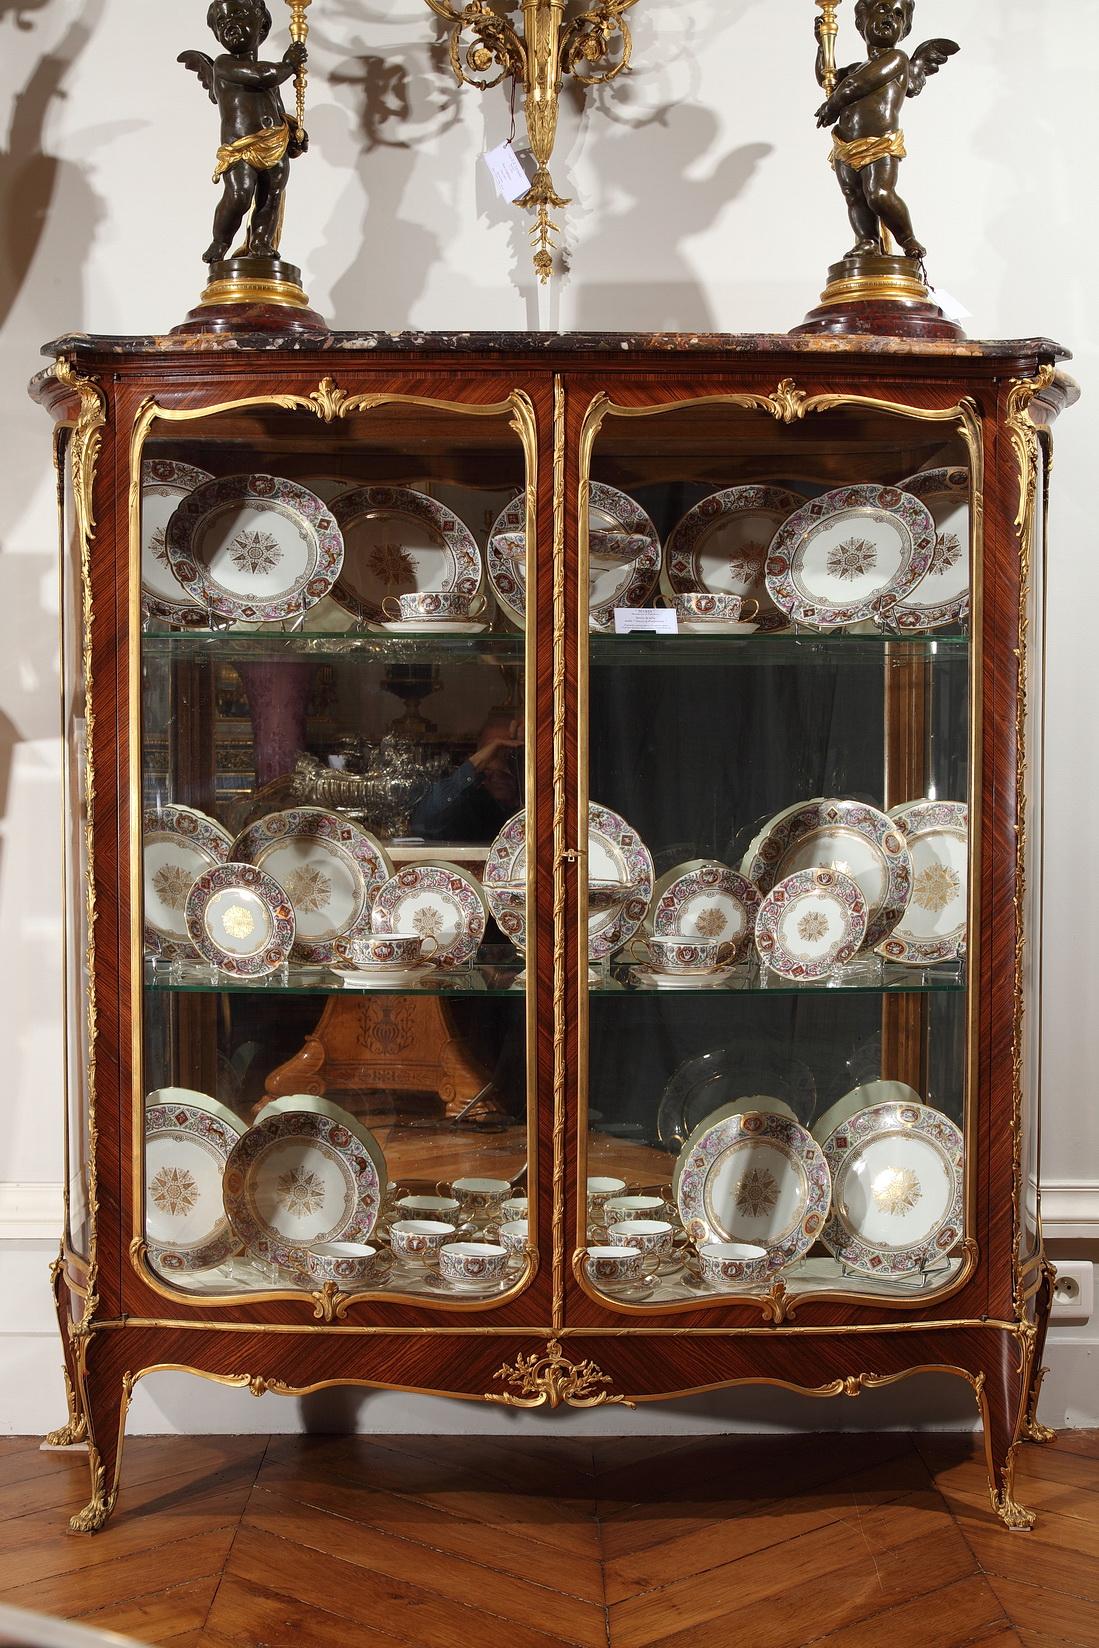 Rare pair of Louis XV style gilt-bronze mounted curved shape vitrines attributed to J.E Zwiener. Glazed on all sides, they open with two doors framed by gilded and chiseled Rocaille style foliated bronze mounts. Resting on four cabriole legs ending